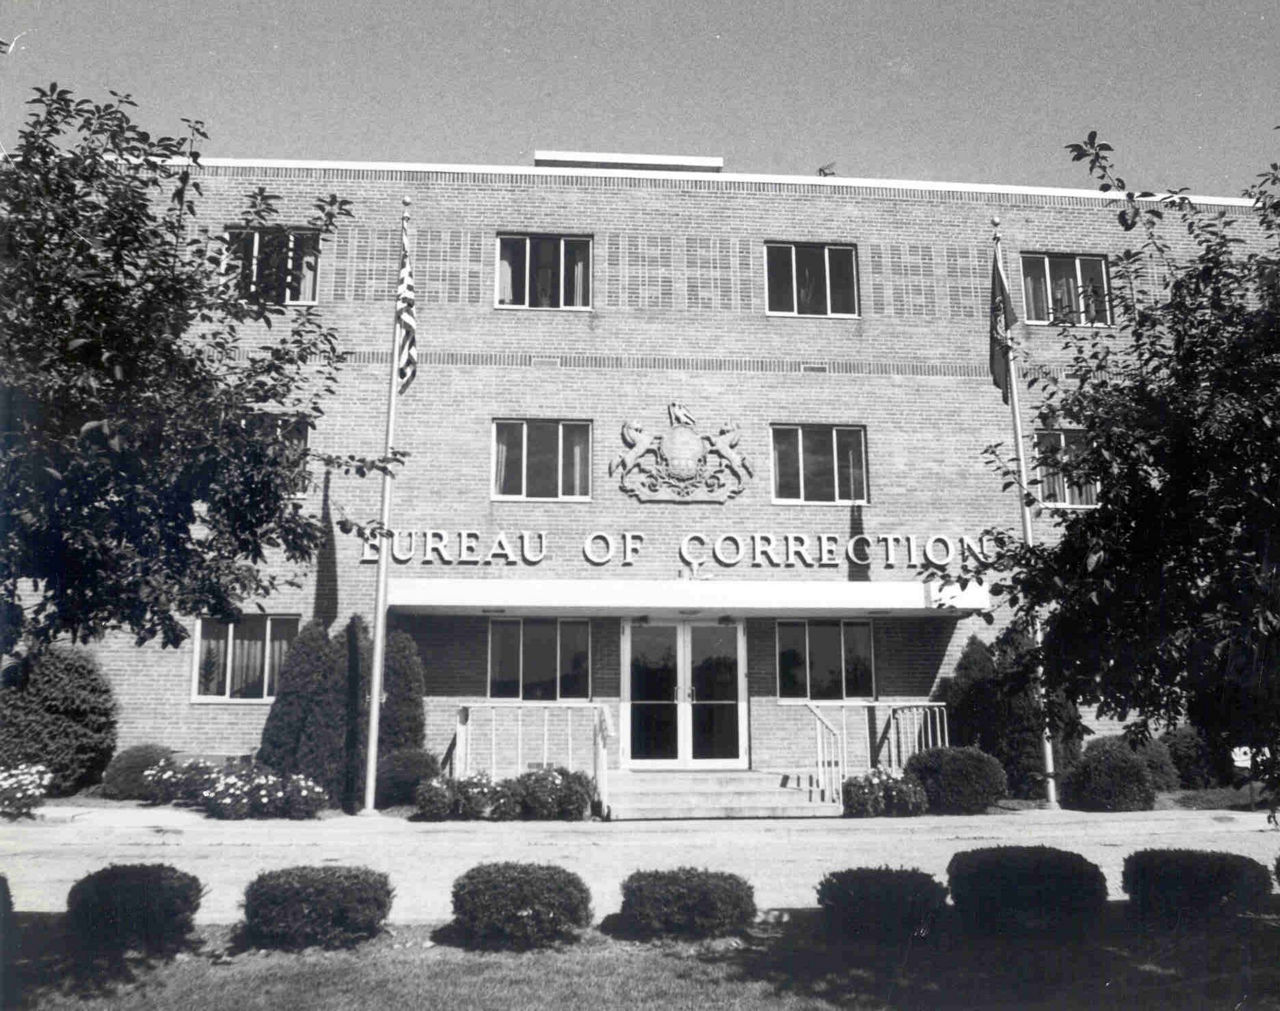 A black and white picture of the old Bureau of Corrections building